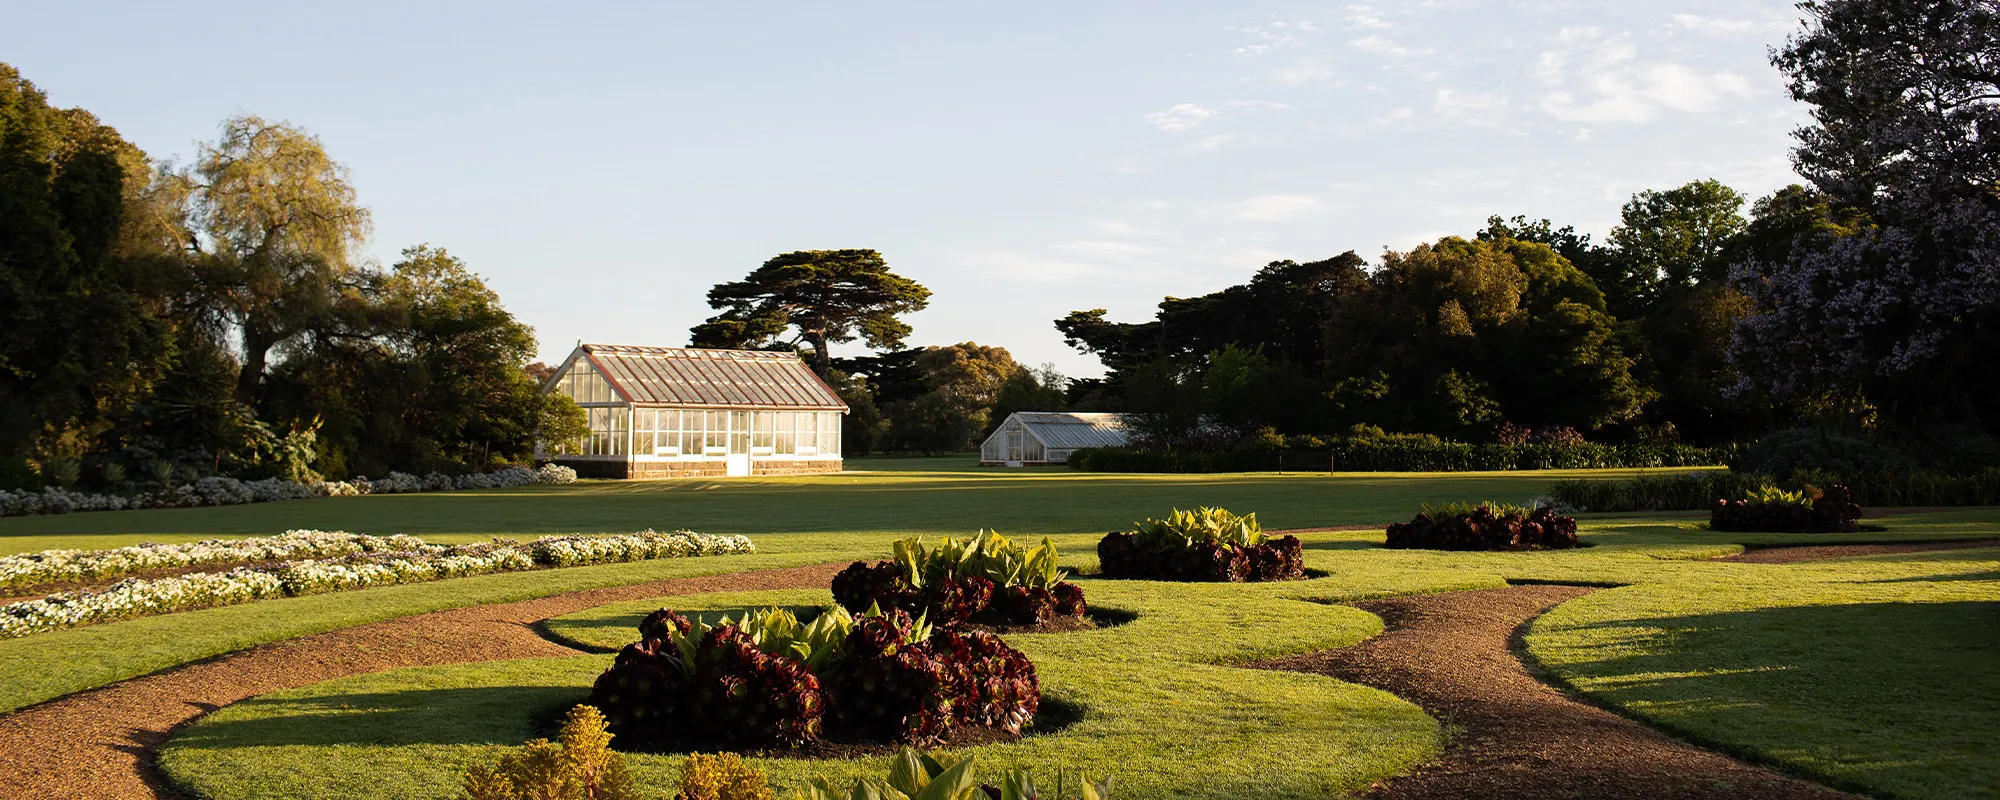 Lancemore Mansion Hotel Werribee Park Boutique Luxury Accommodation Facility grounds 2000 x 800 6